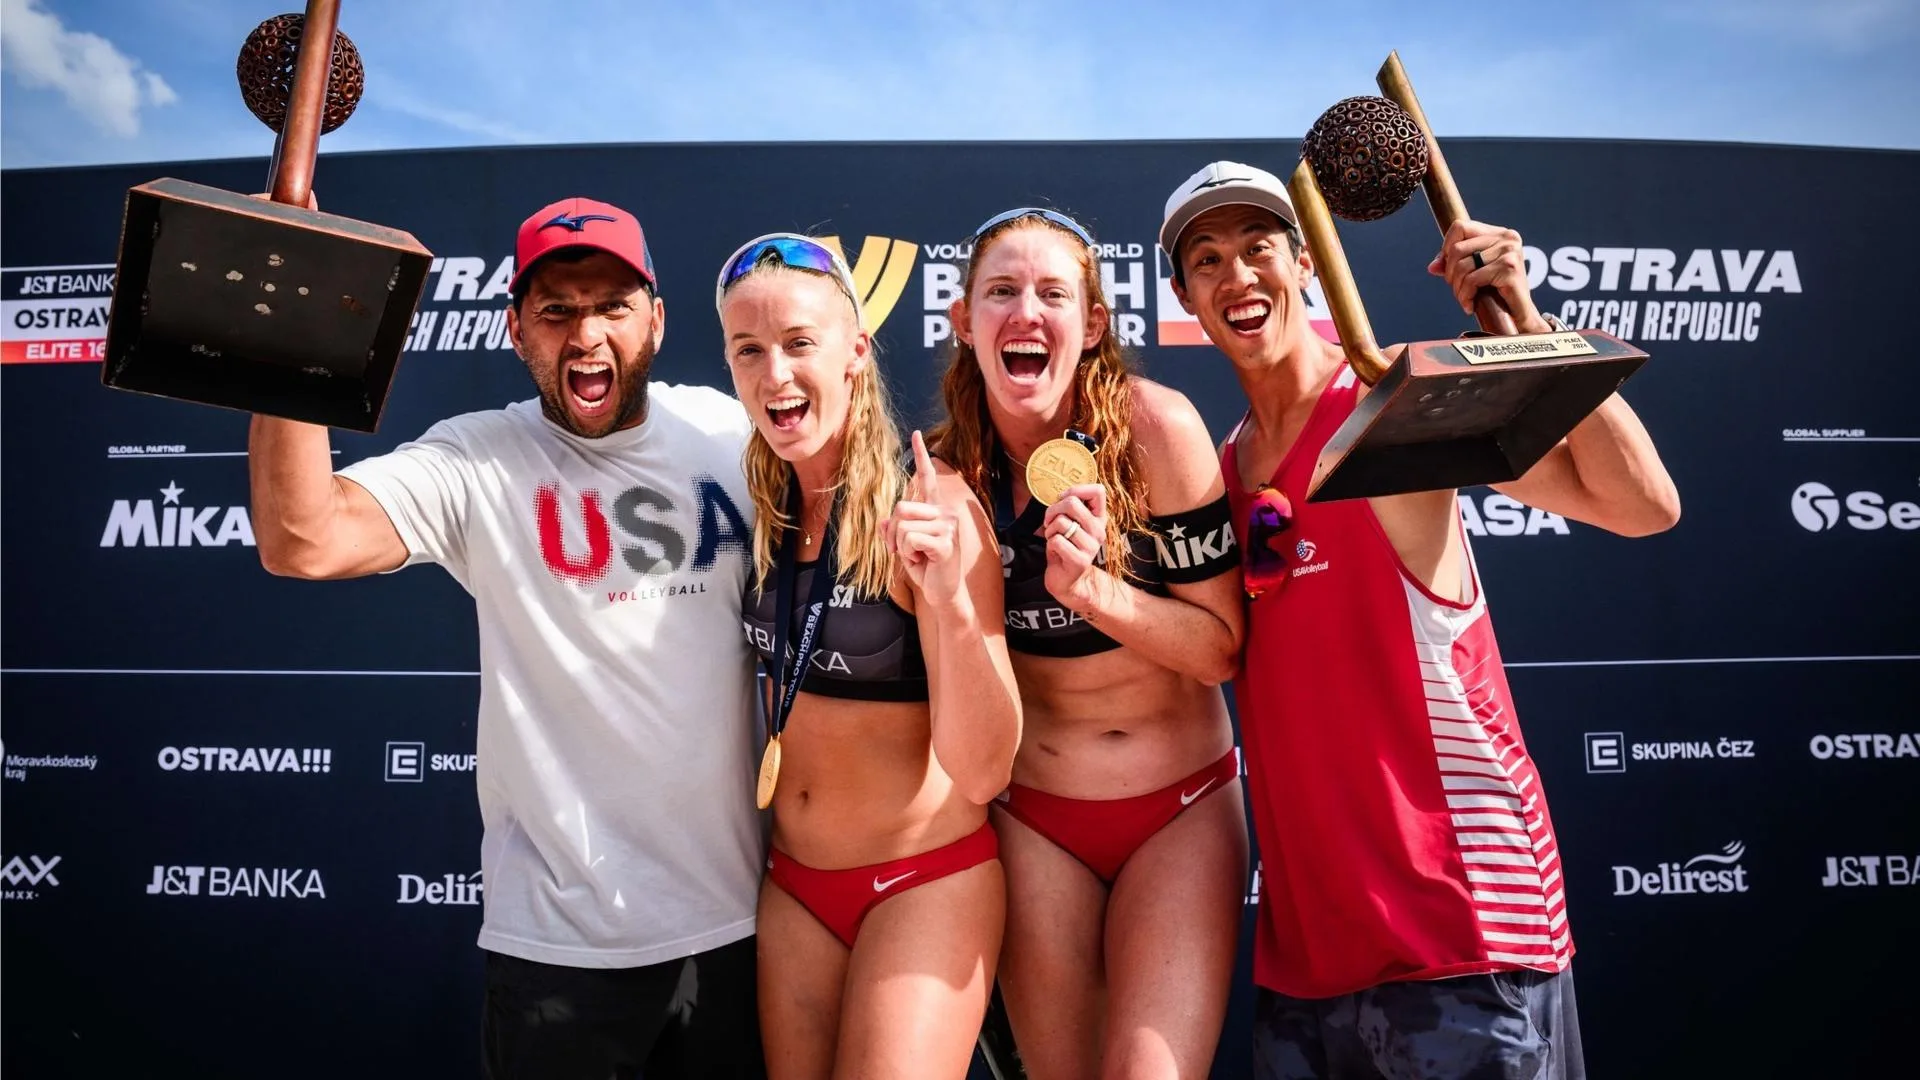 USC Beach Volleyball's Cheng and Hughes Claim Gold at Ostrava Elite 16